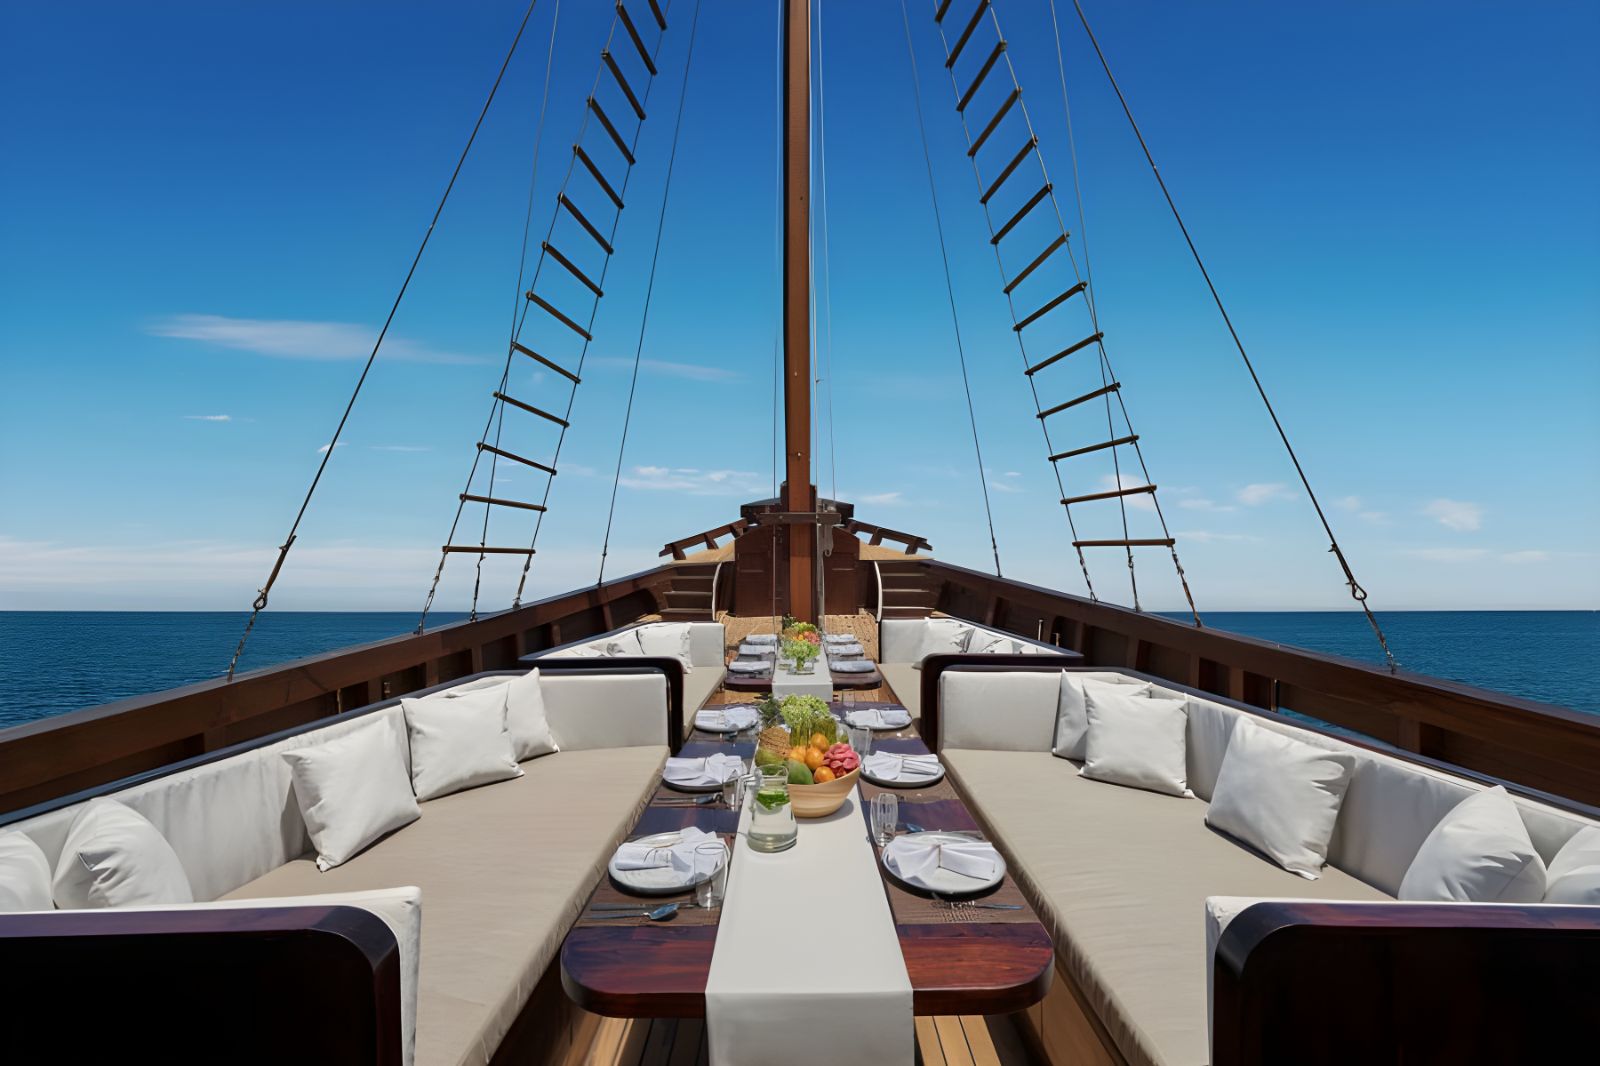 Outdoor dining and deck area onboard the Samsara Samudra phinisi in Indonesia